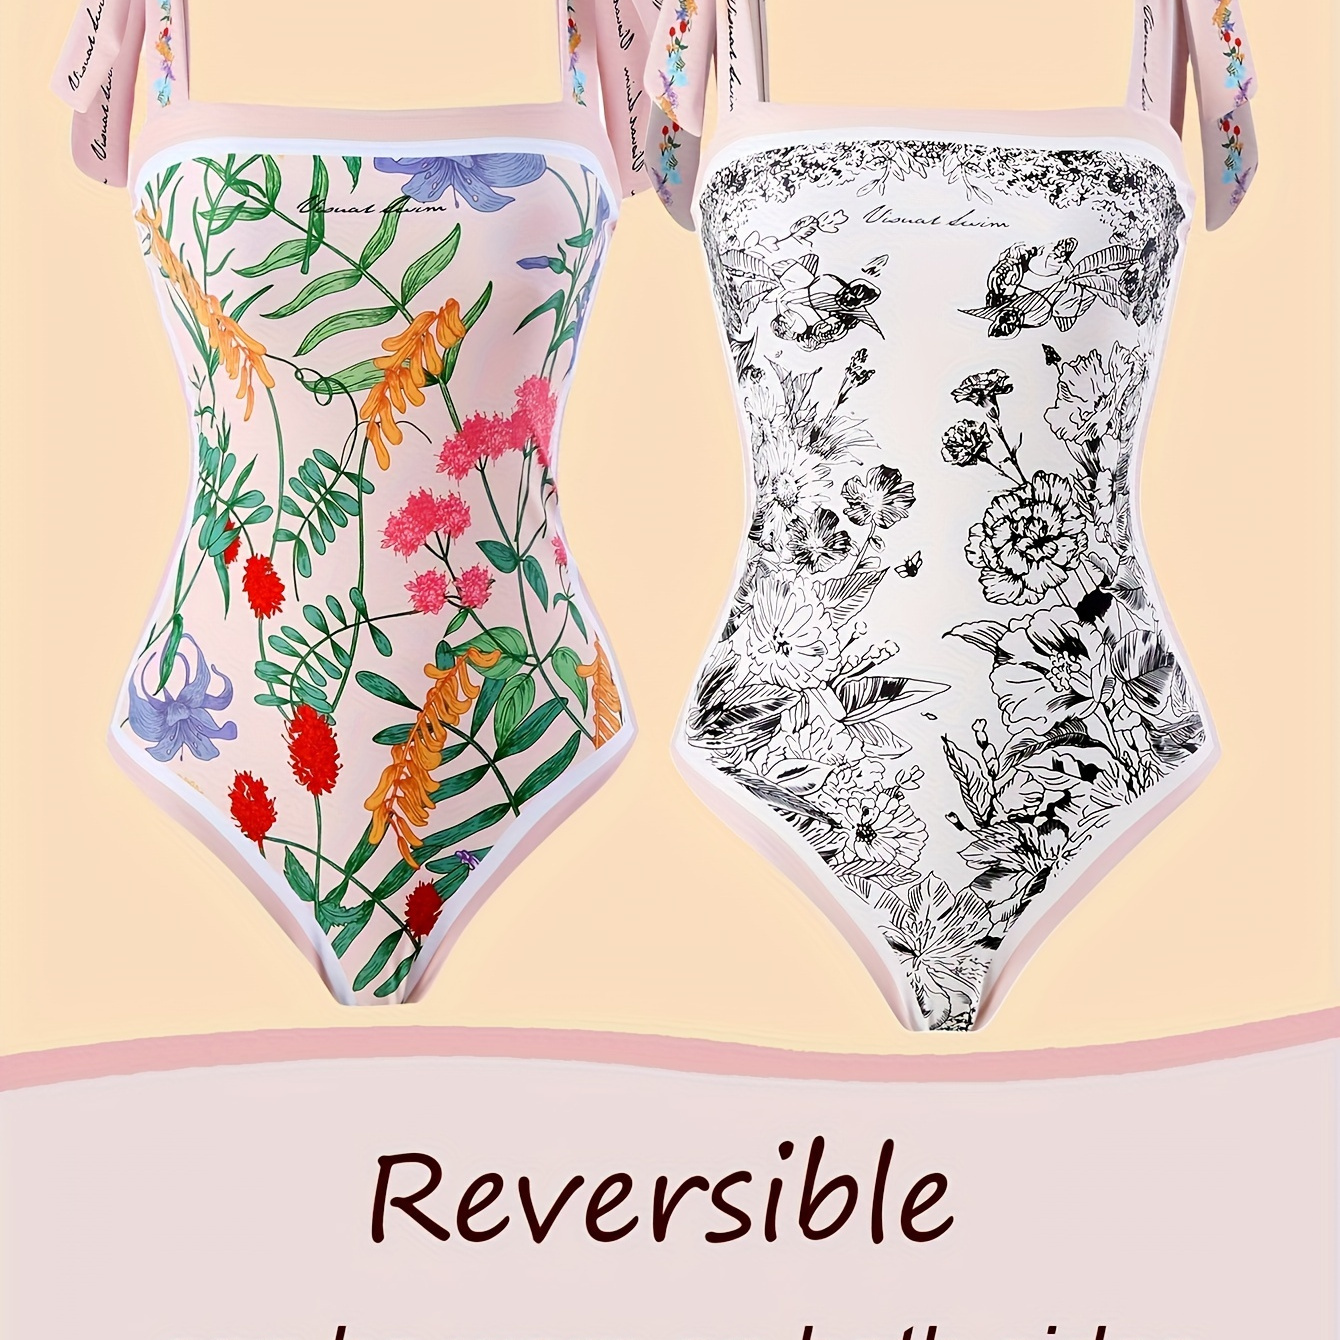 

Vintage Style Floral Print Reversible One-piece Swimsuit, Shoulder-tie High Stretch Elegant Bathing Suits, Women's Swimwear & Clothing